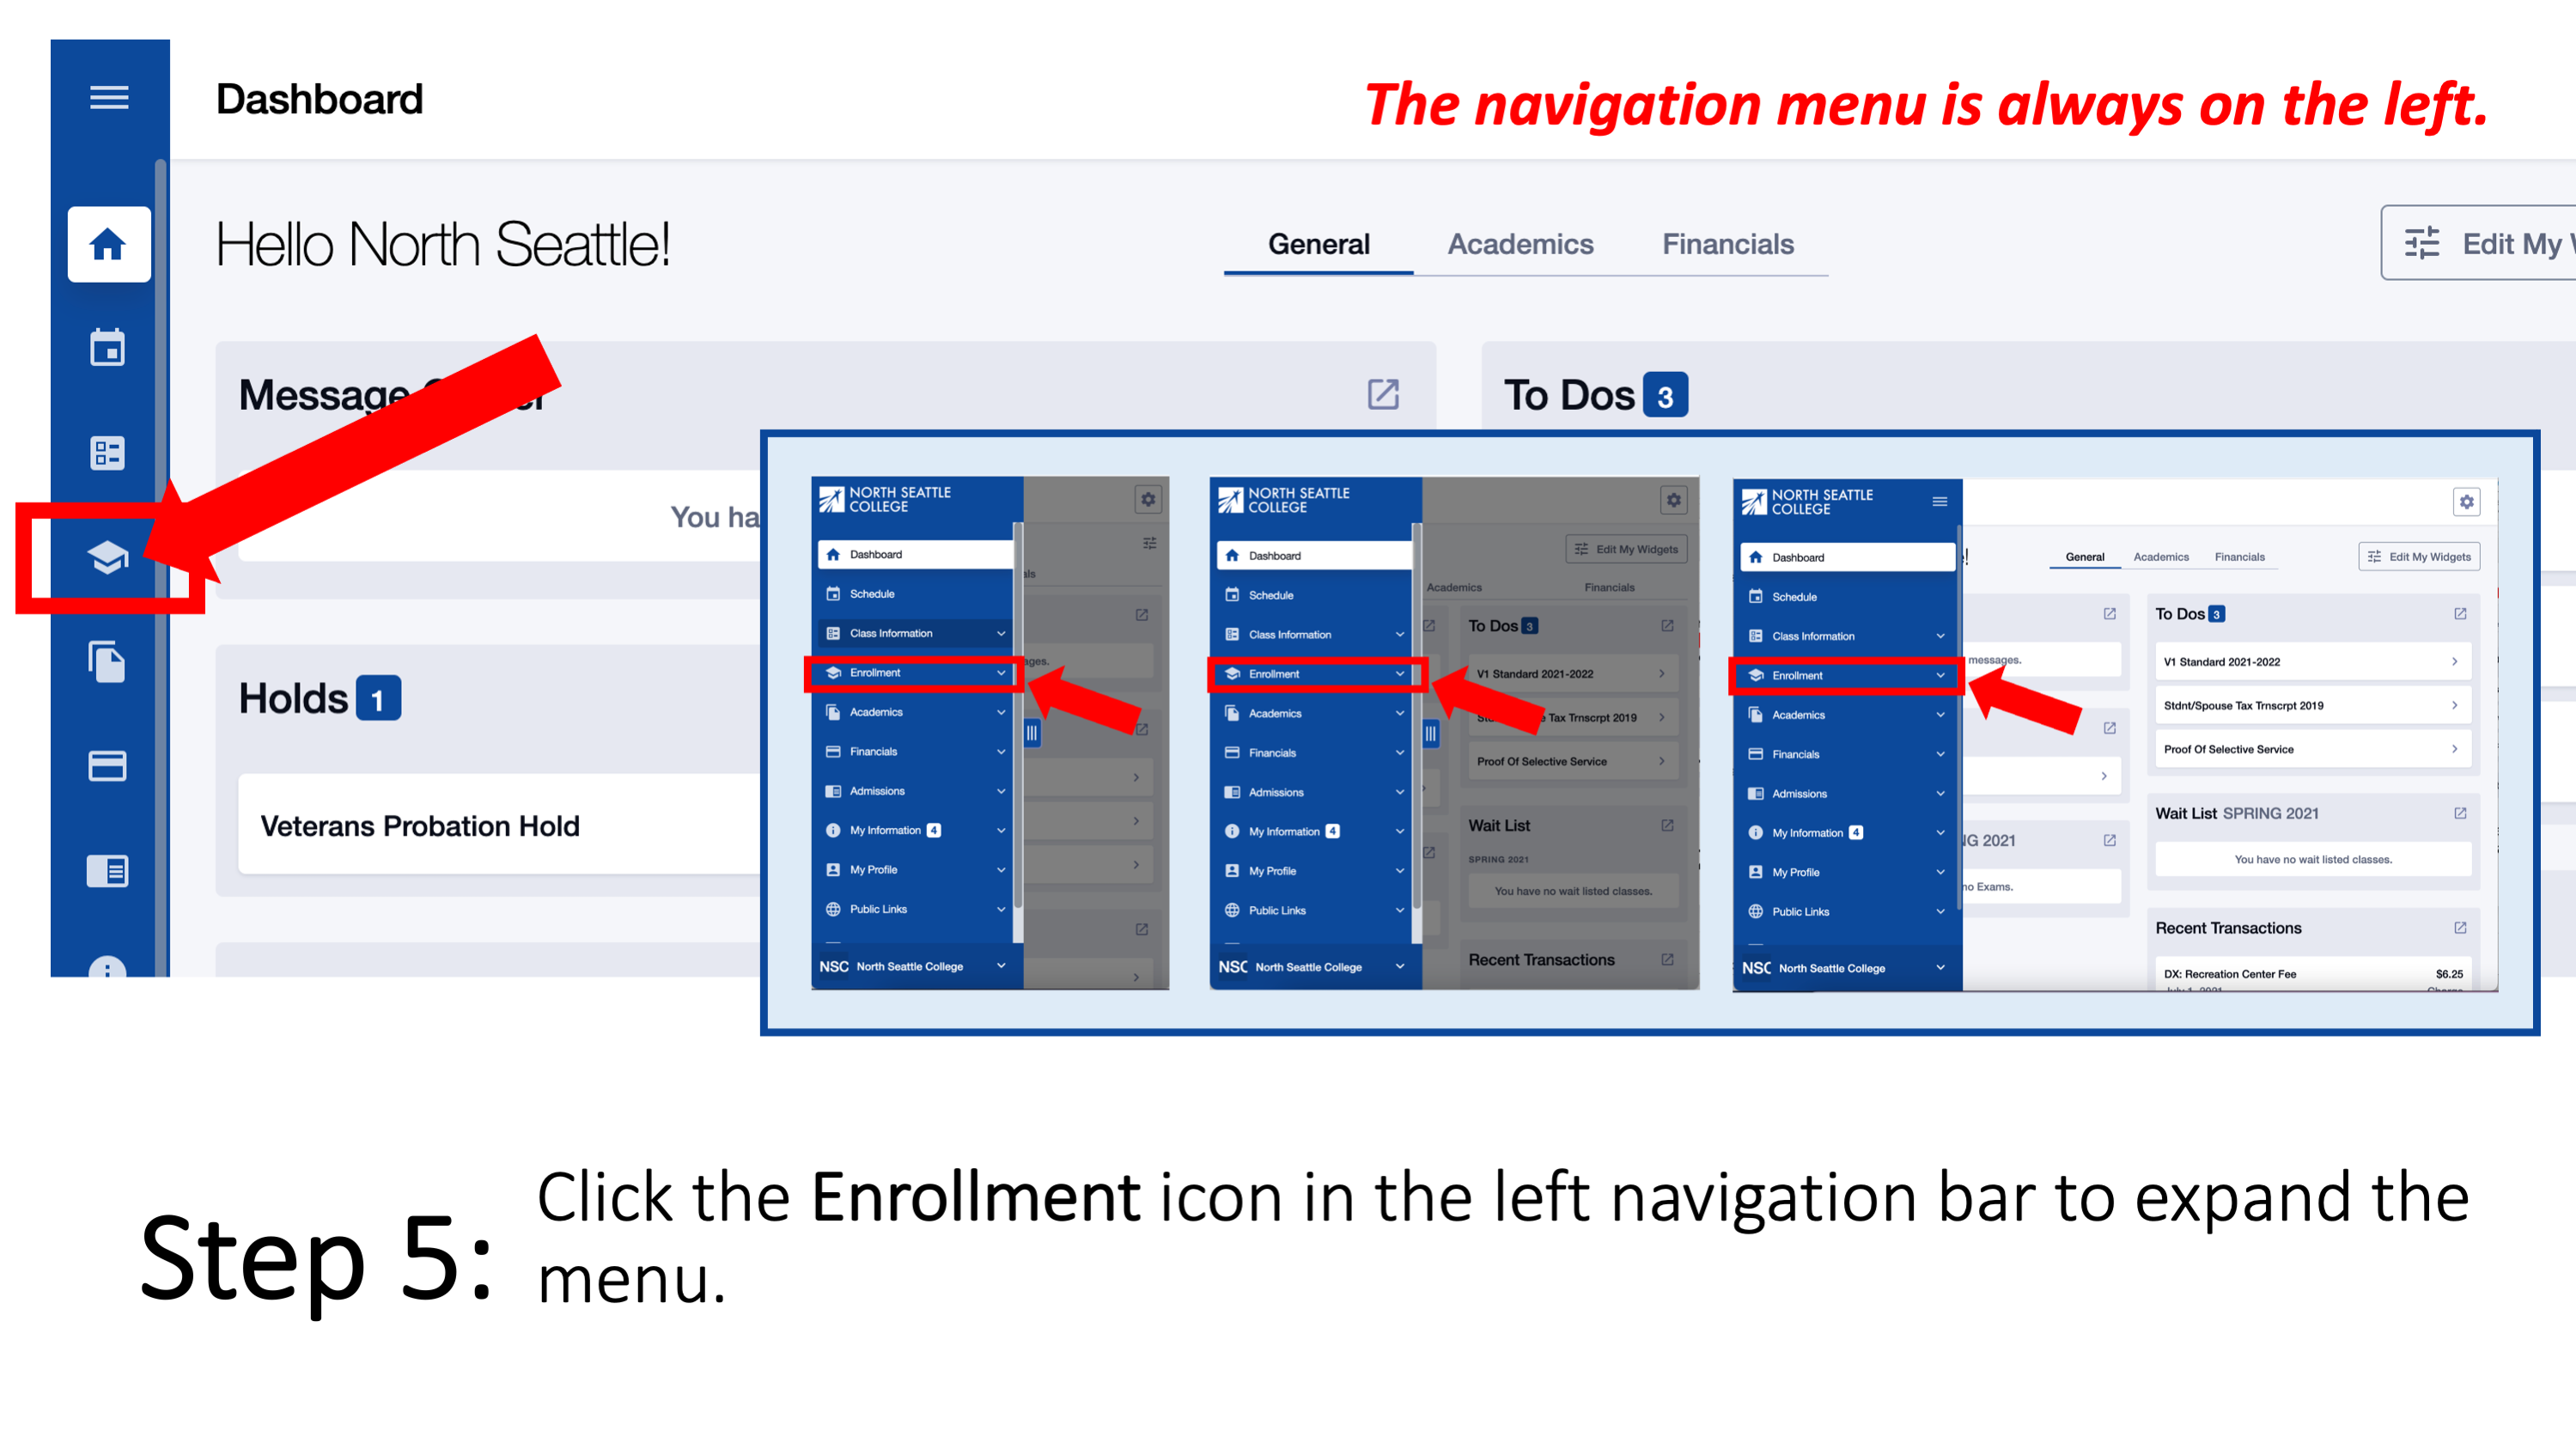 Step 5: Click the Enrollment icon in the left navigation bar to expand the menu.